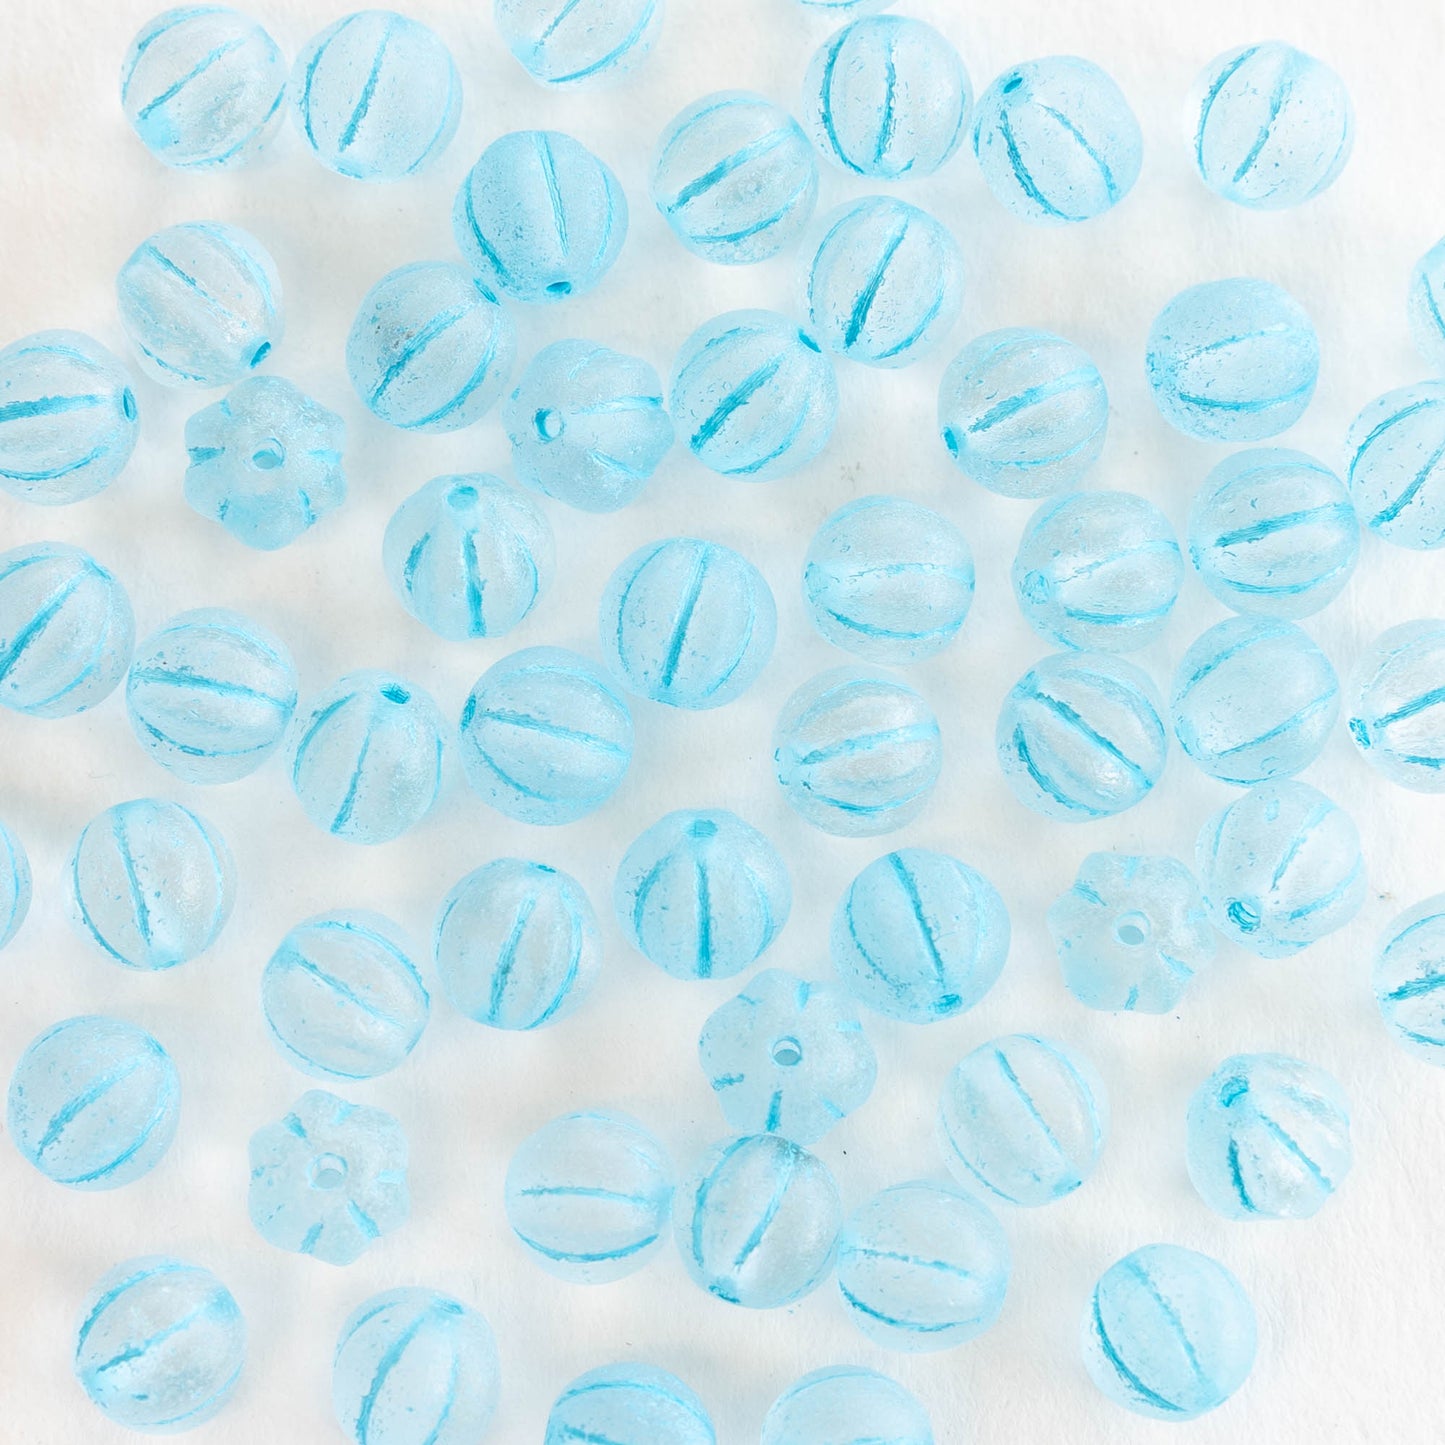 8mm Glass Melon Beads - Crystal with Aqua Wash - 20 or 60